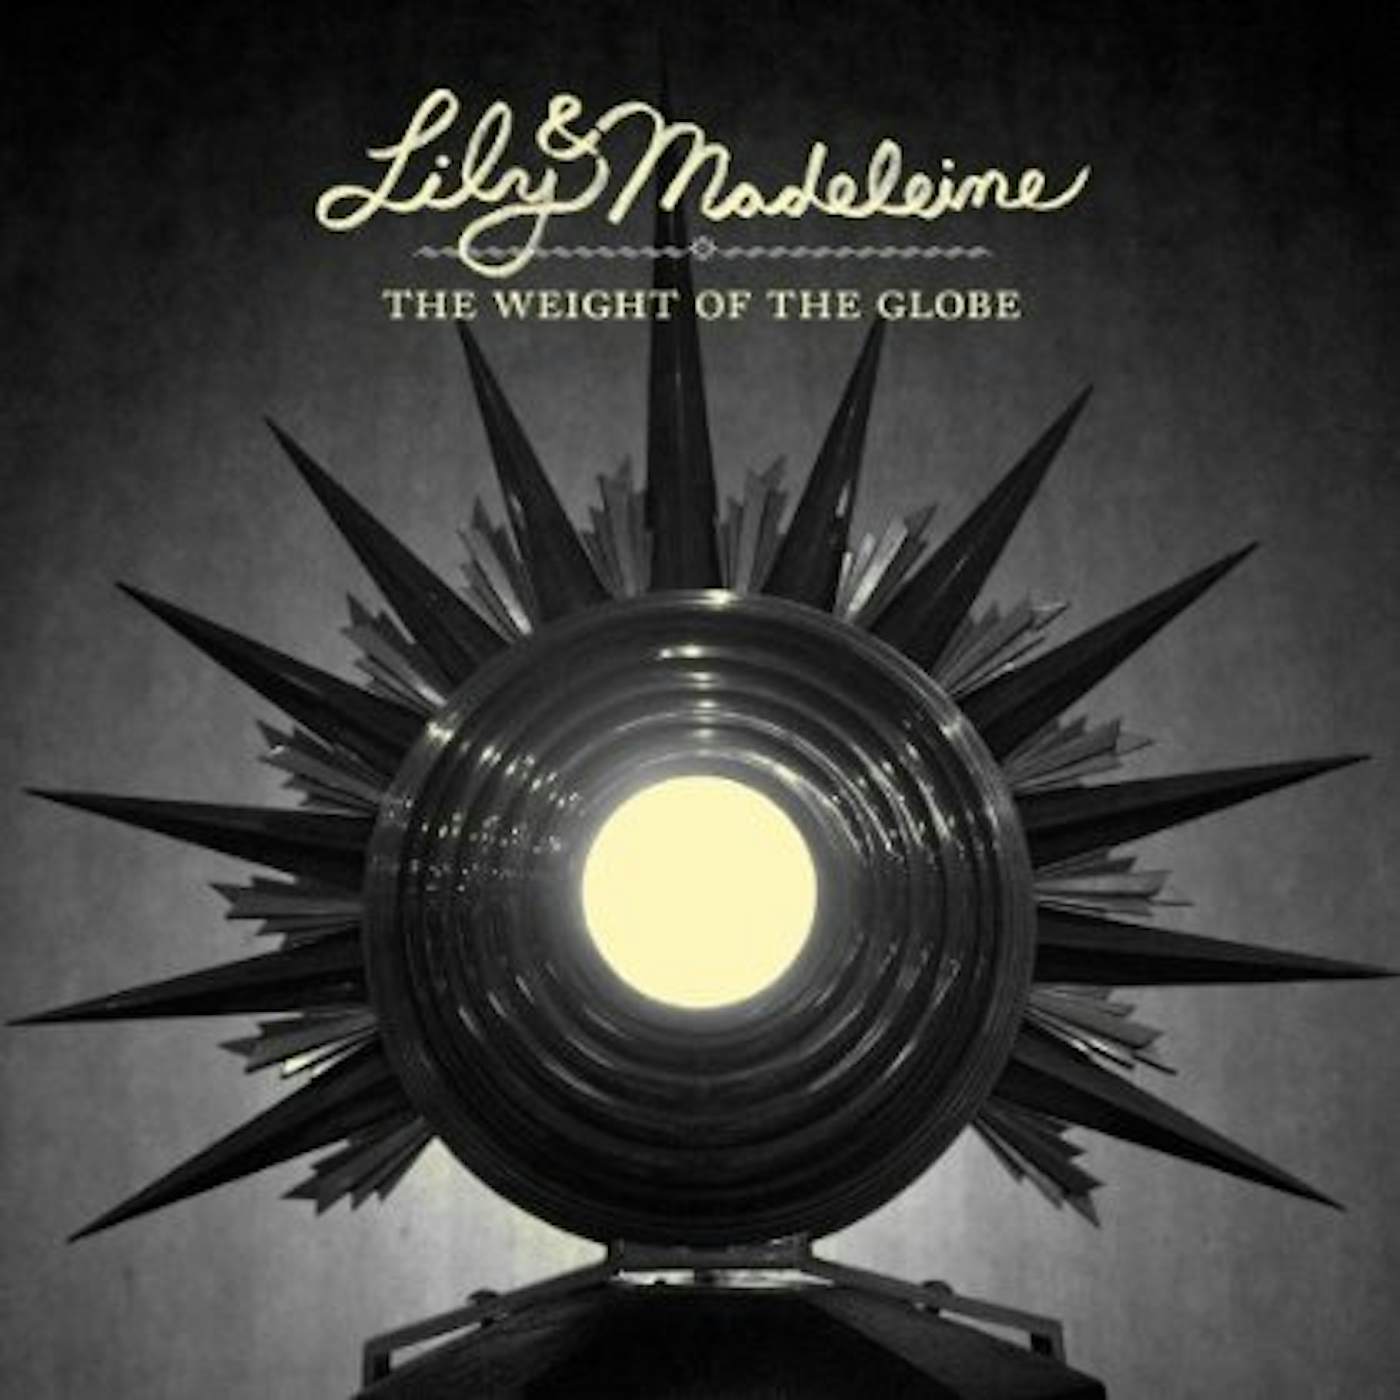 Lily & Madeleine WEIGHT OF THE GLOBE Vinyl Record